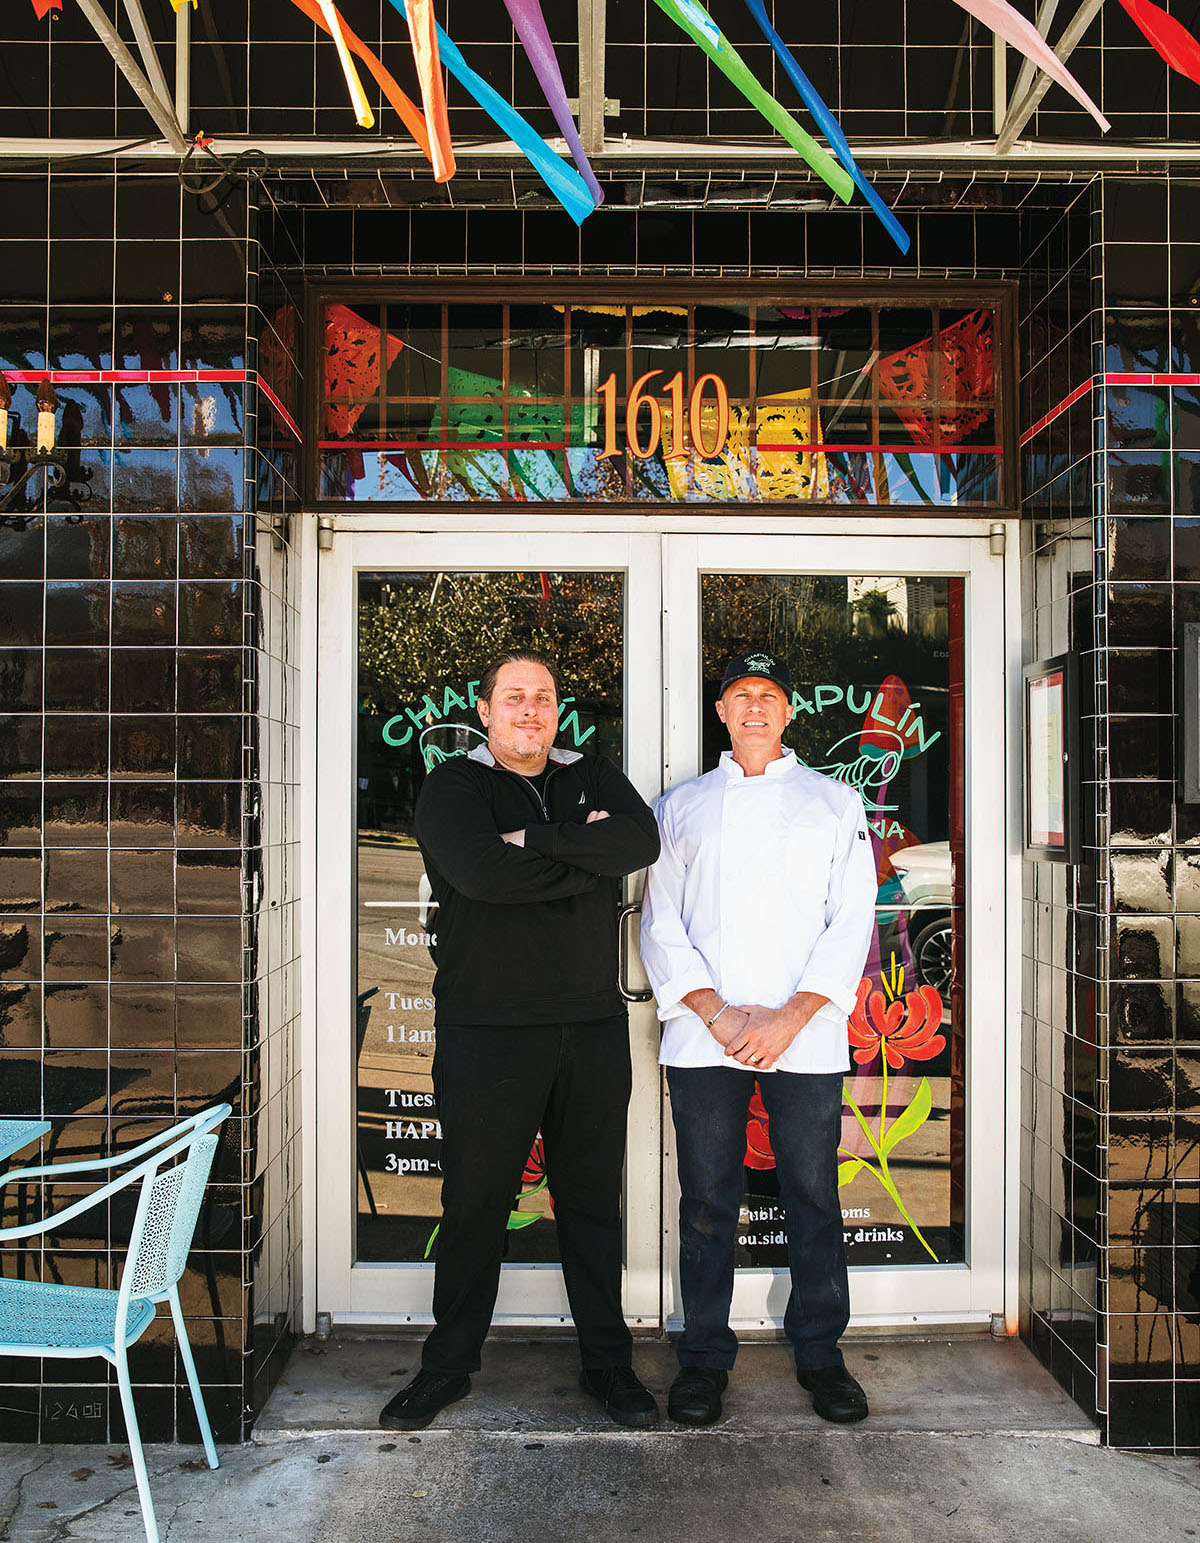 Two men in chef's coats stand out front of the glass doors of a restaurant